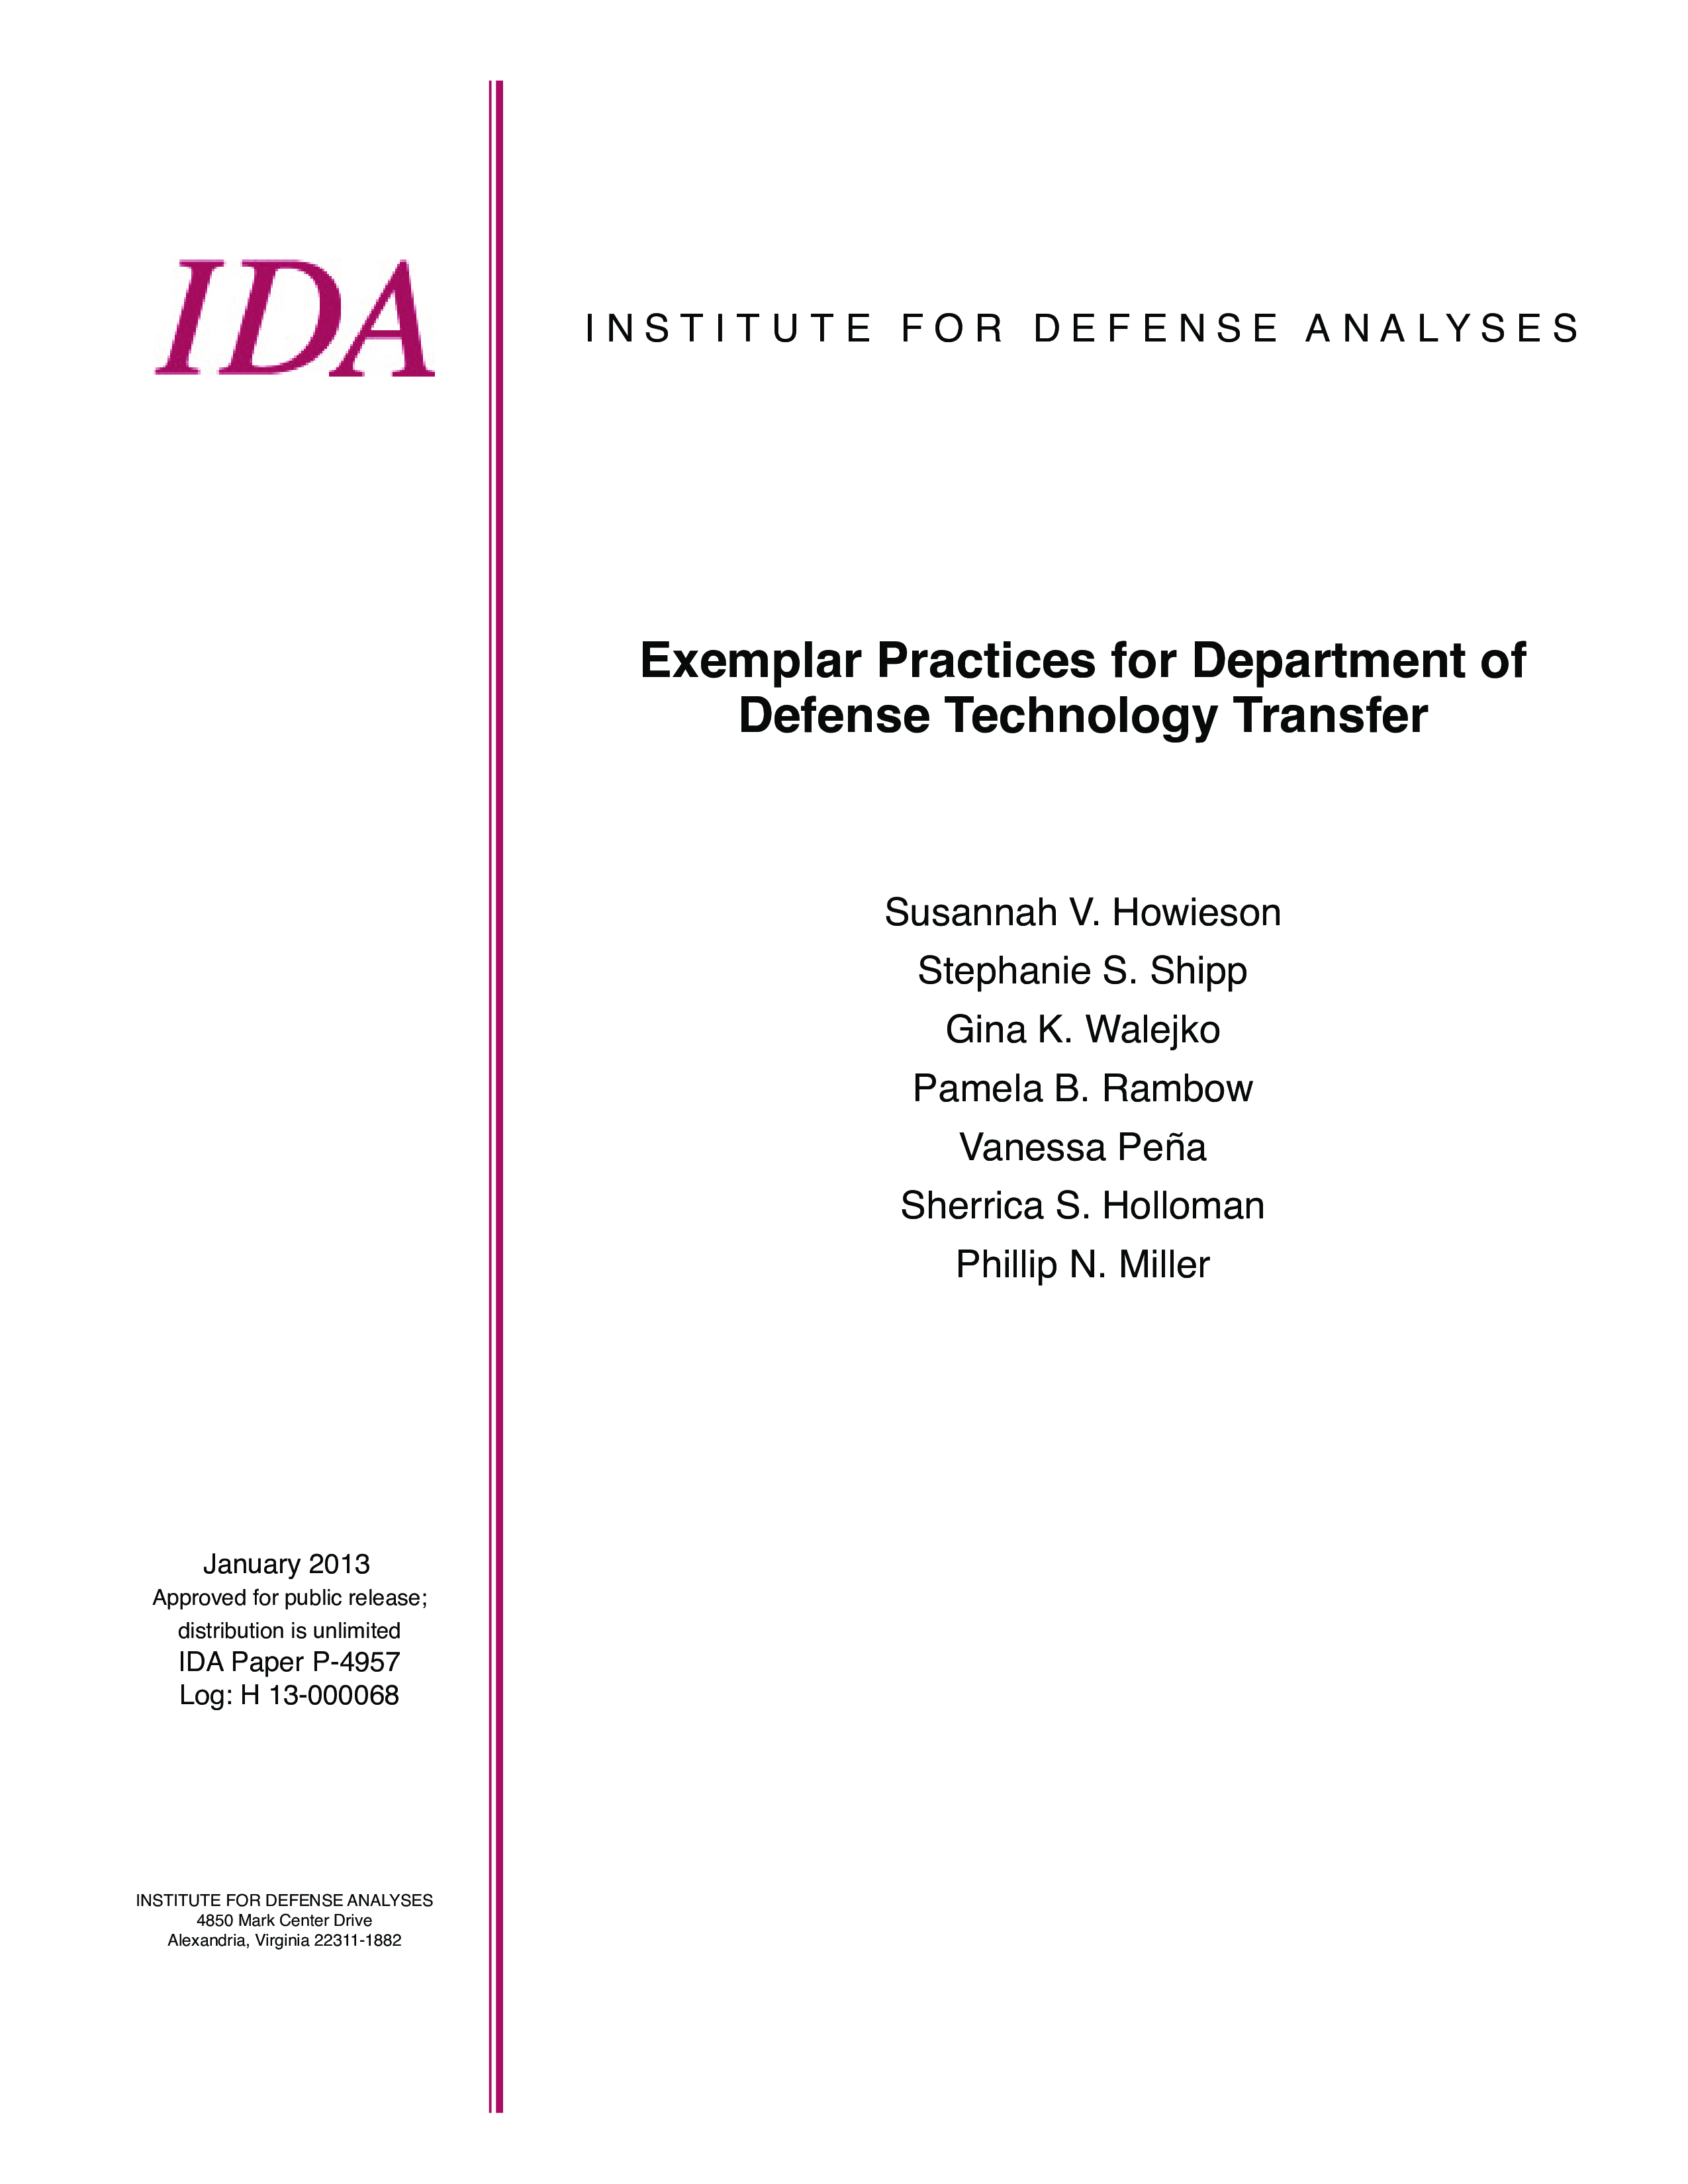 Exemplar Practices for Department of Defense Technology Transfer